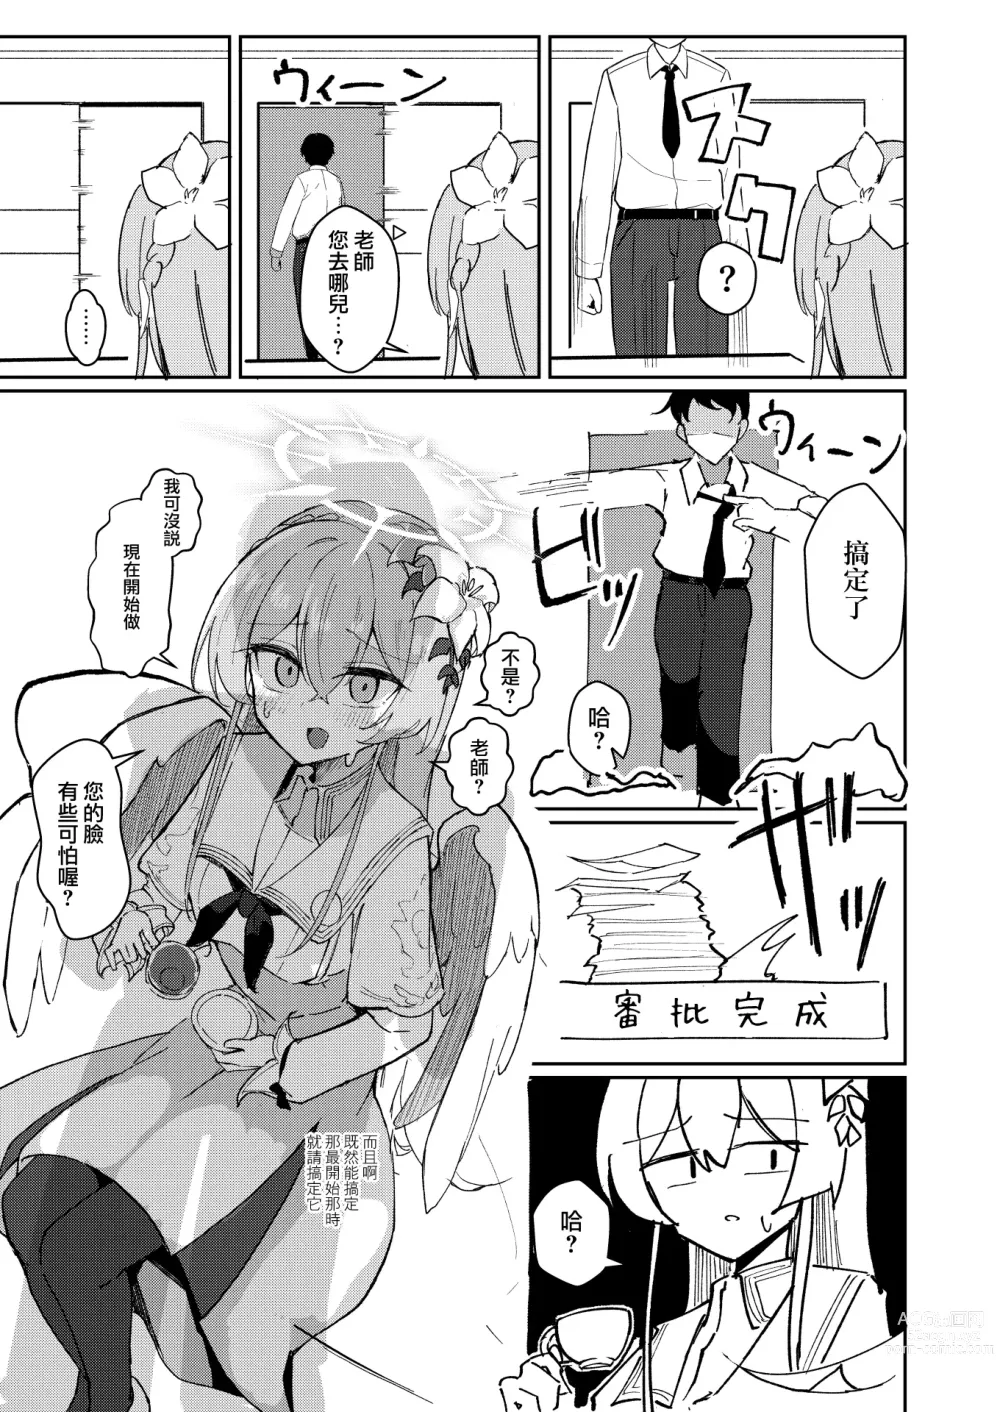 Page 8 of doujinshi 情欲羽翼下的學生會